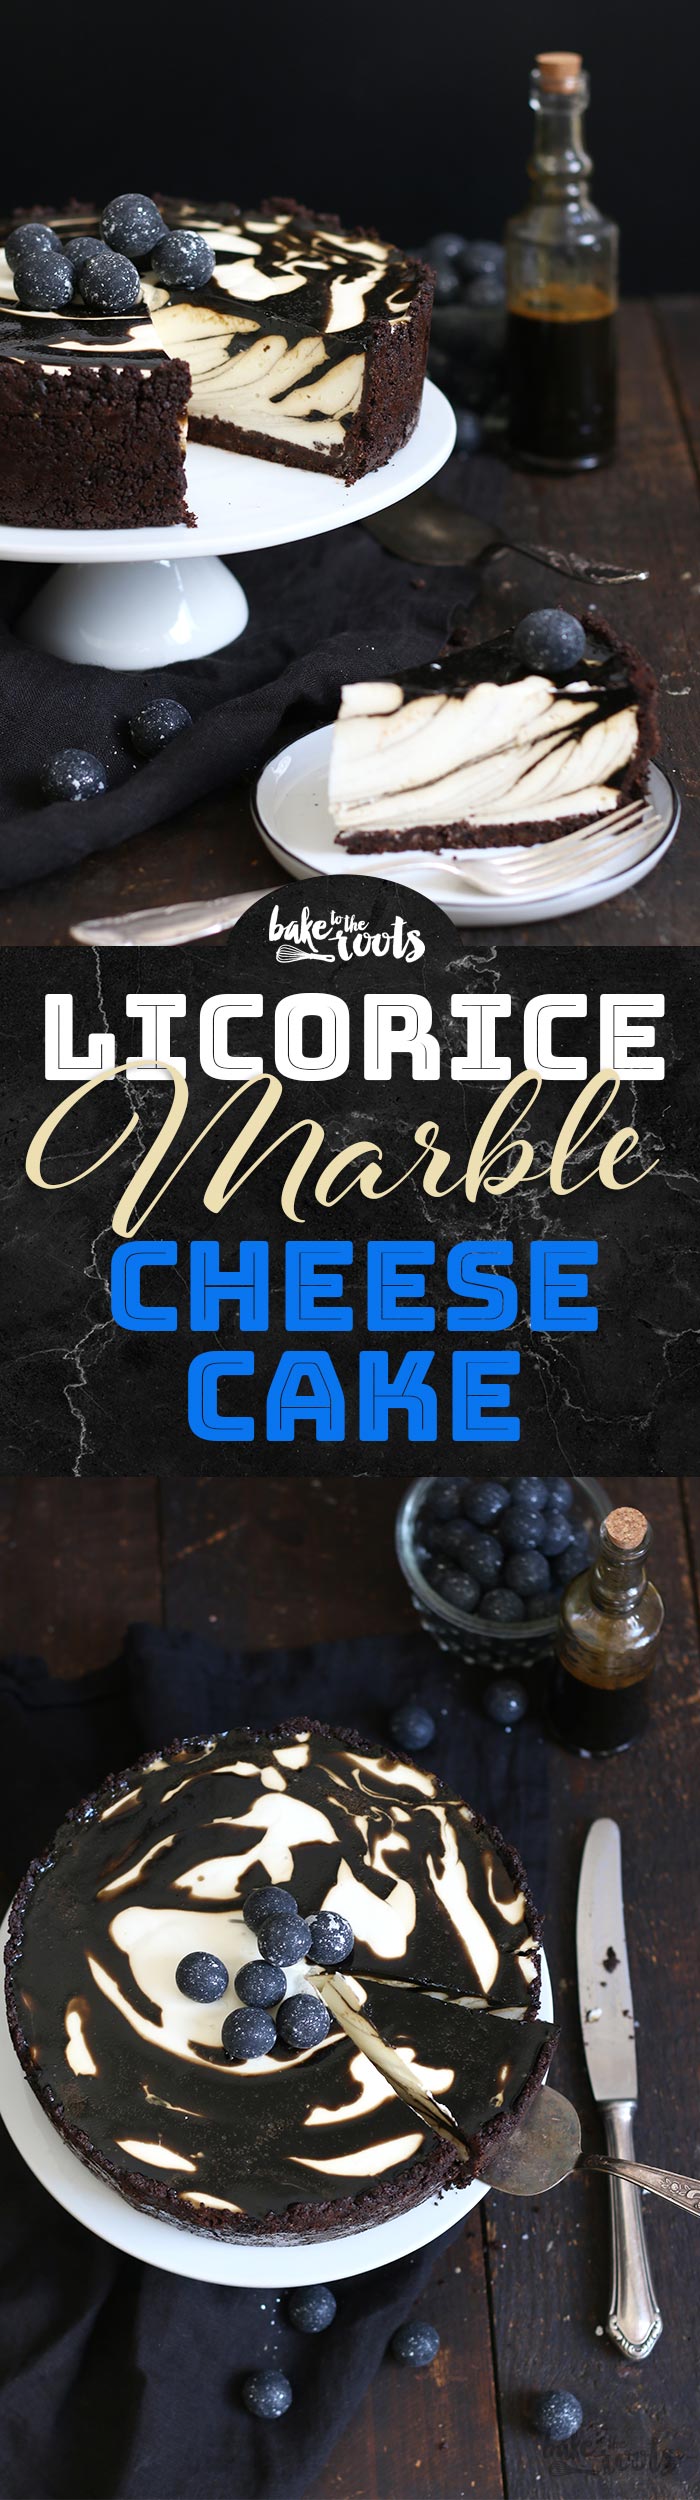 Licorice Marble Cheesecake | Bake to the roots